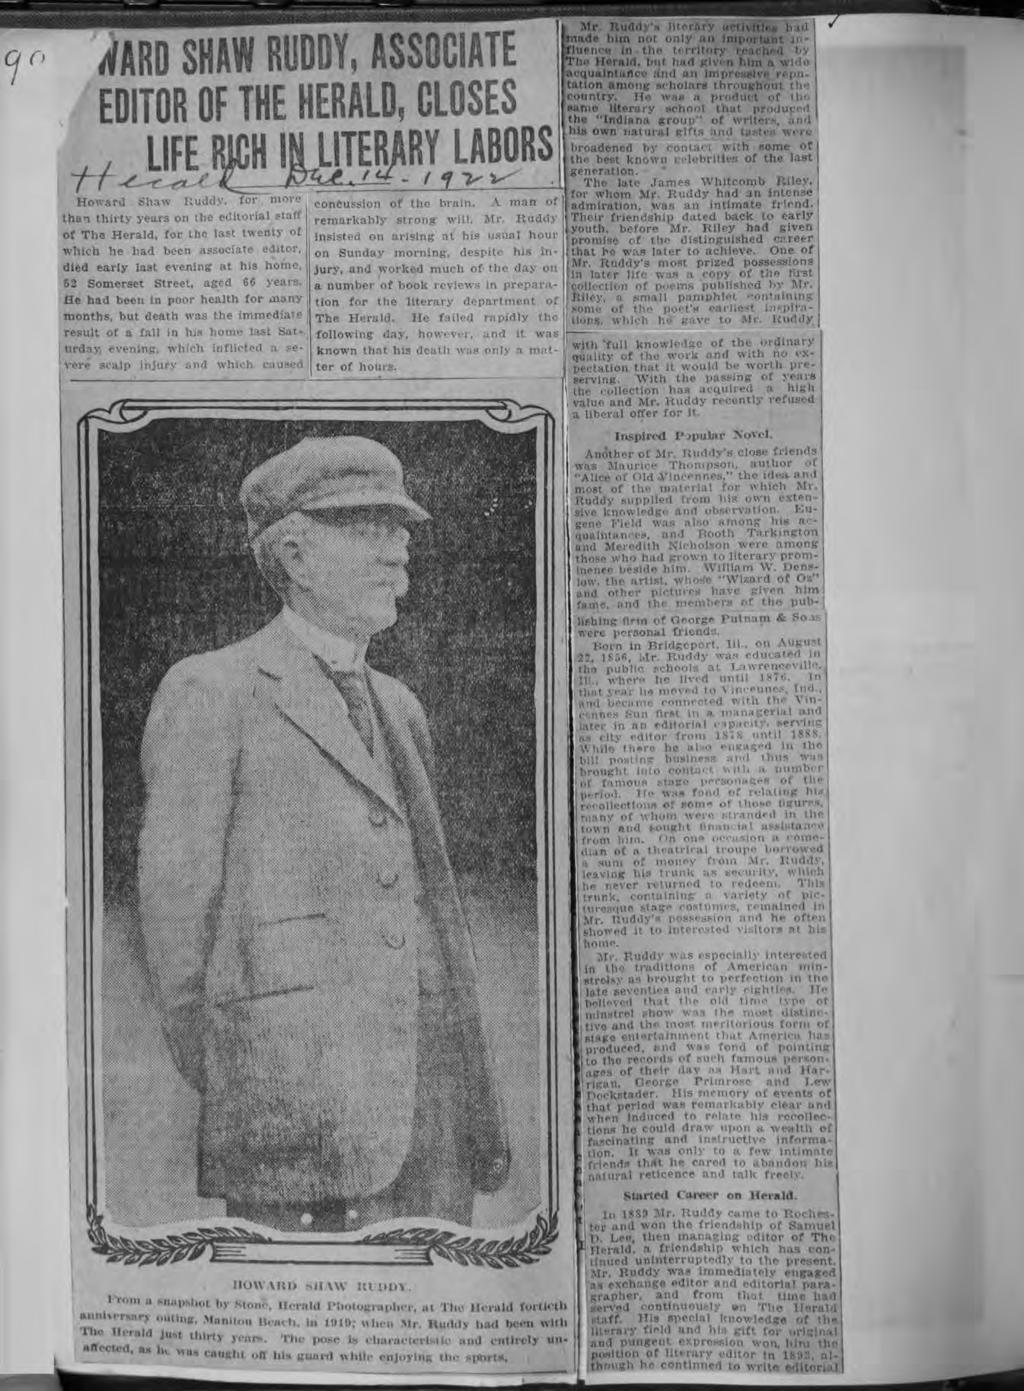 whch? o H- WARD SHAW RUDDY, ASSOCATE EDTOR OF THE HERALD, CLOSES LFE RCH N LTERARY LABORS Howard Shaw Ruddy, for more, than thrty years on the edtoral staff of The Herald, for the last twenty of whch